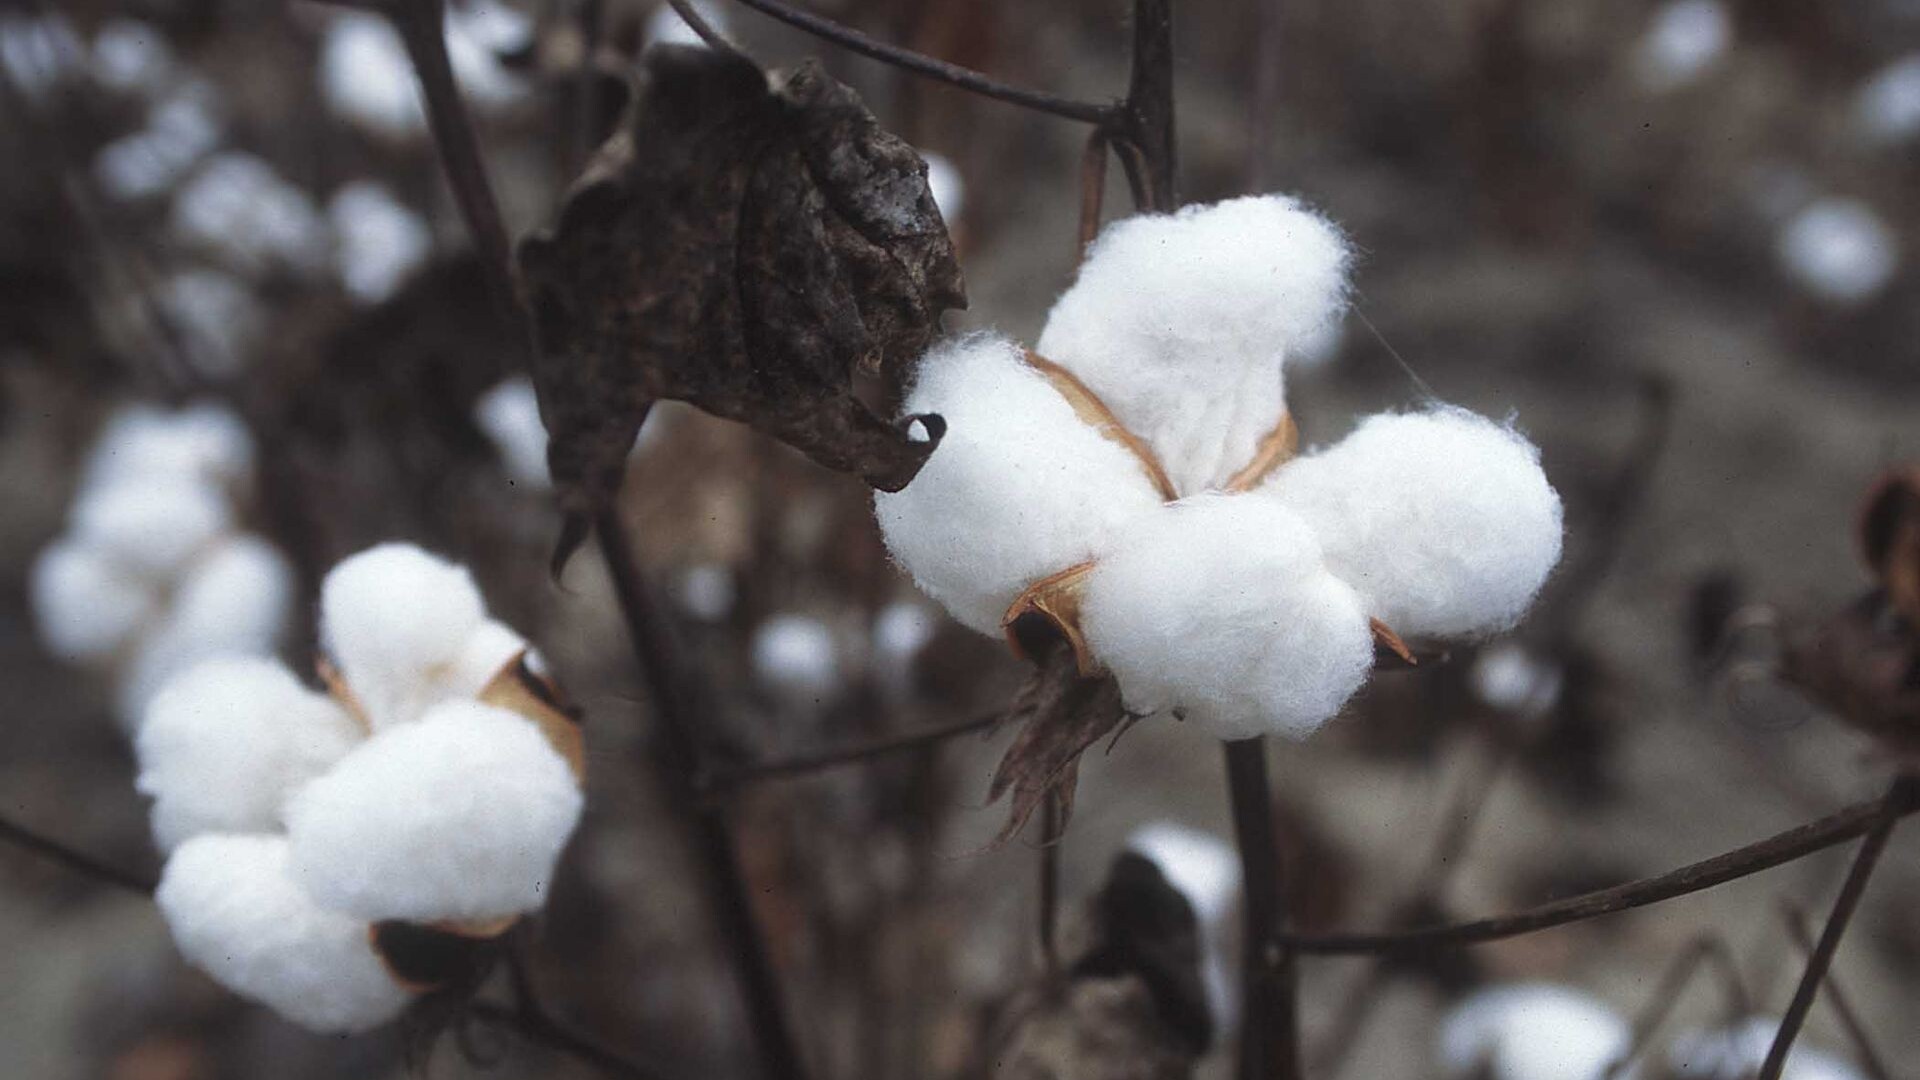 Carbon Credits and Cotton